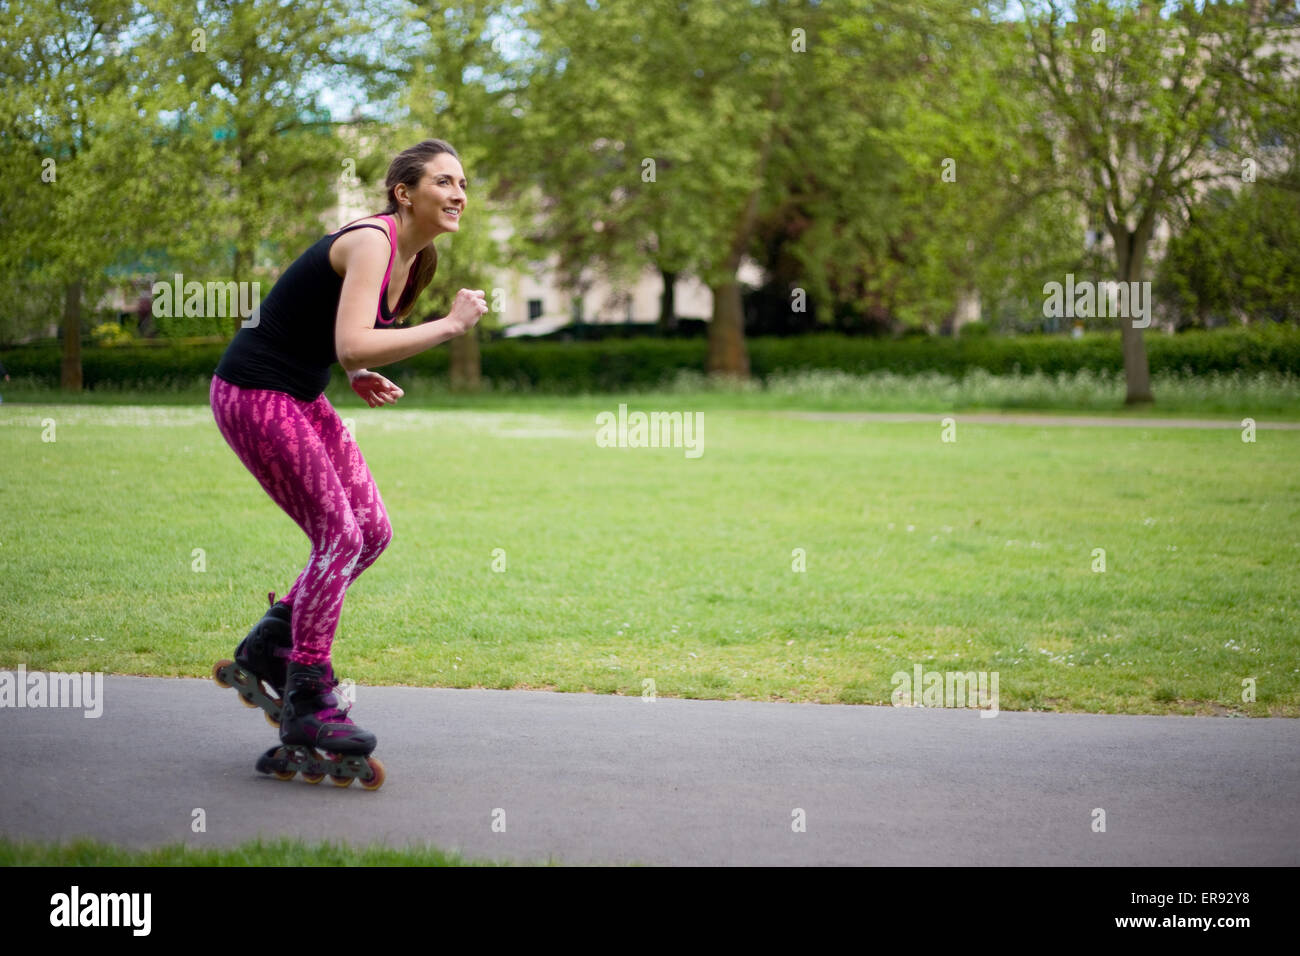 young woman rollerblading in the park Stock Photo